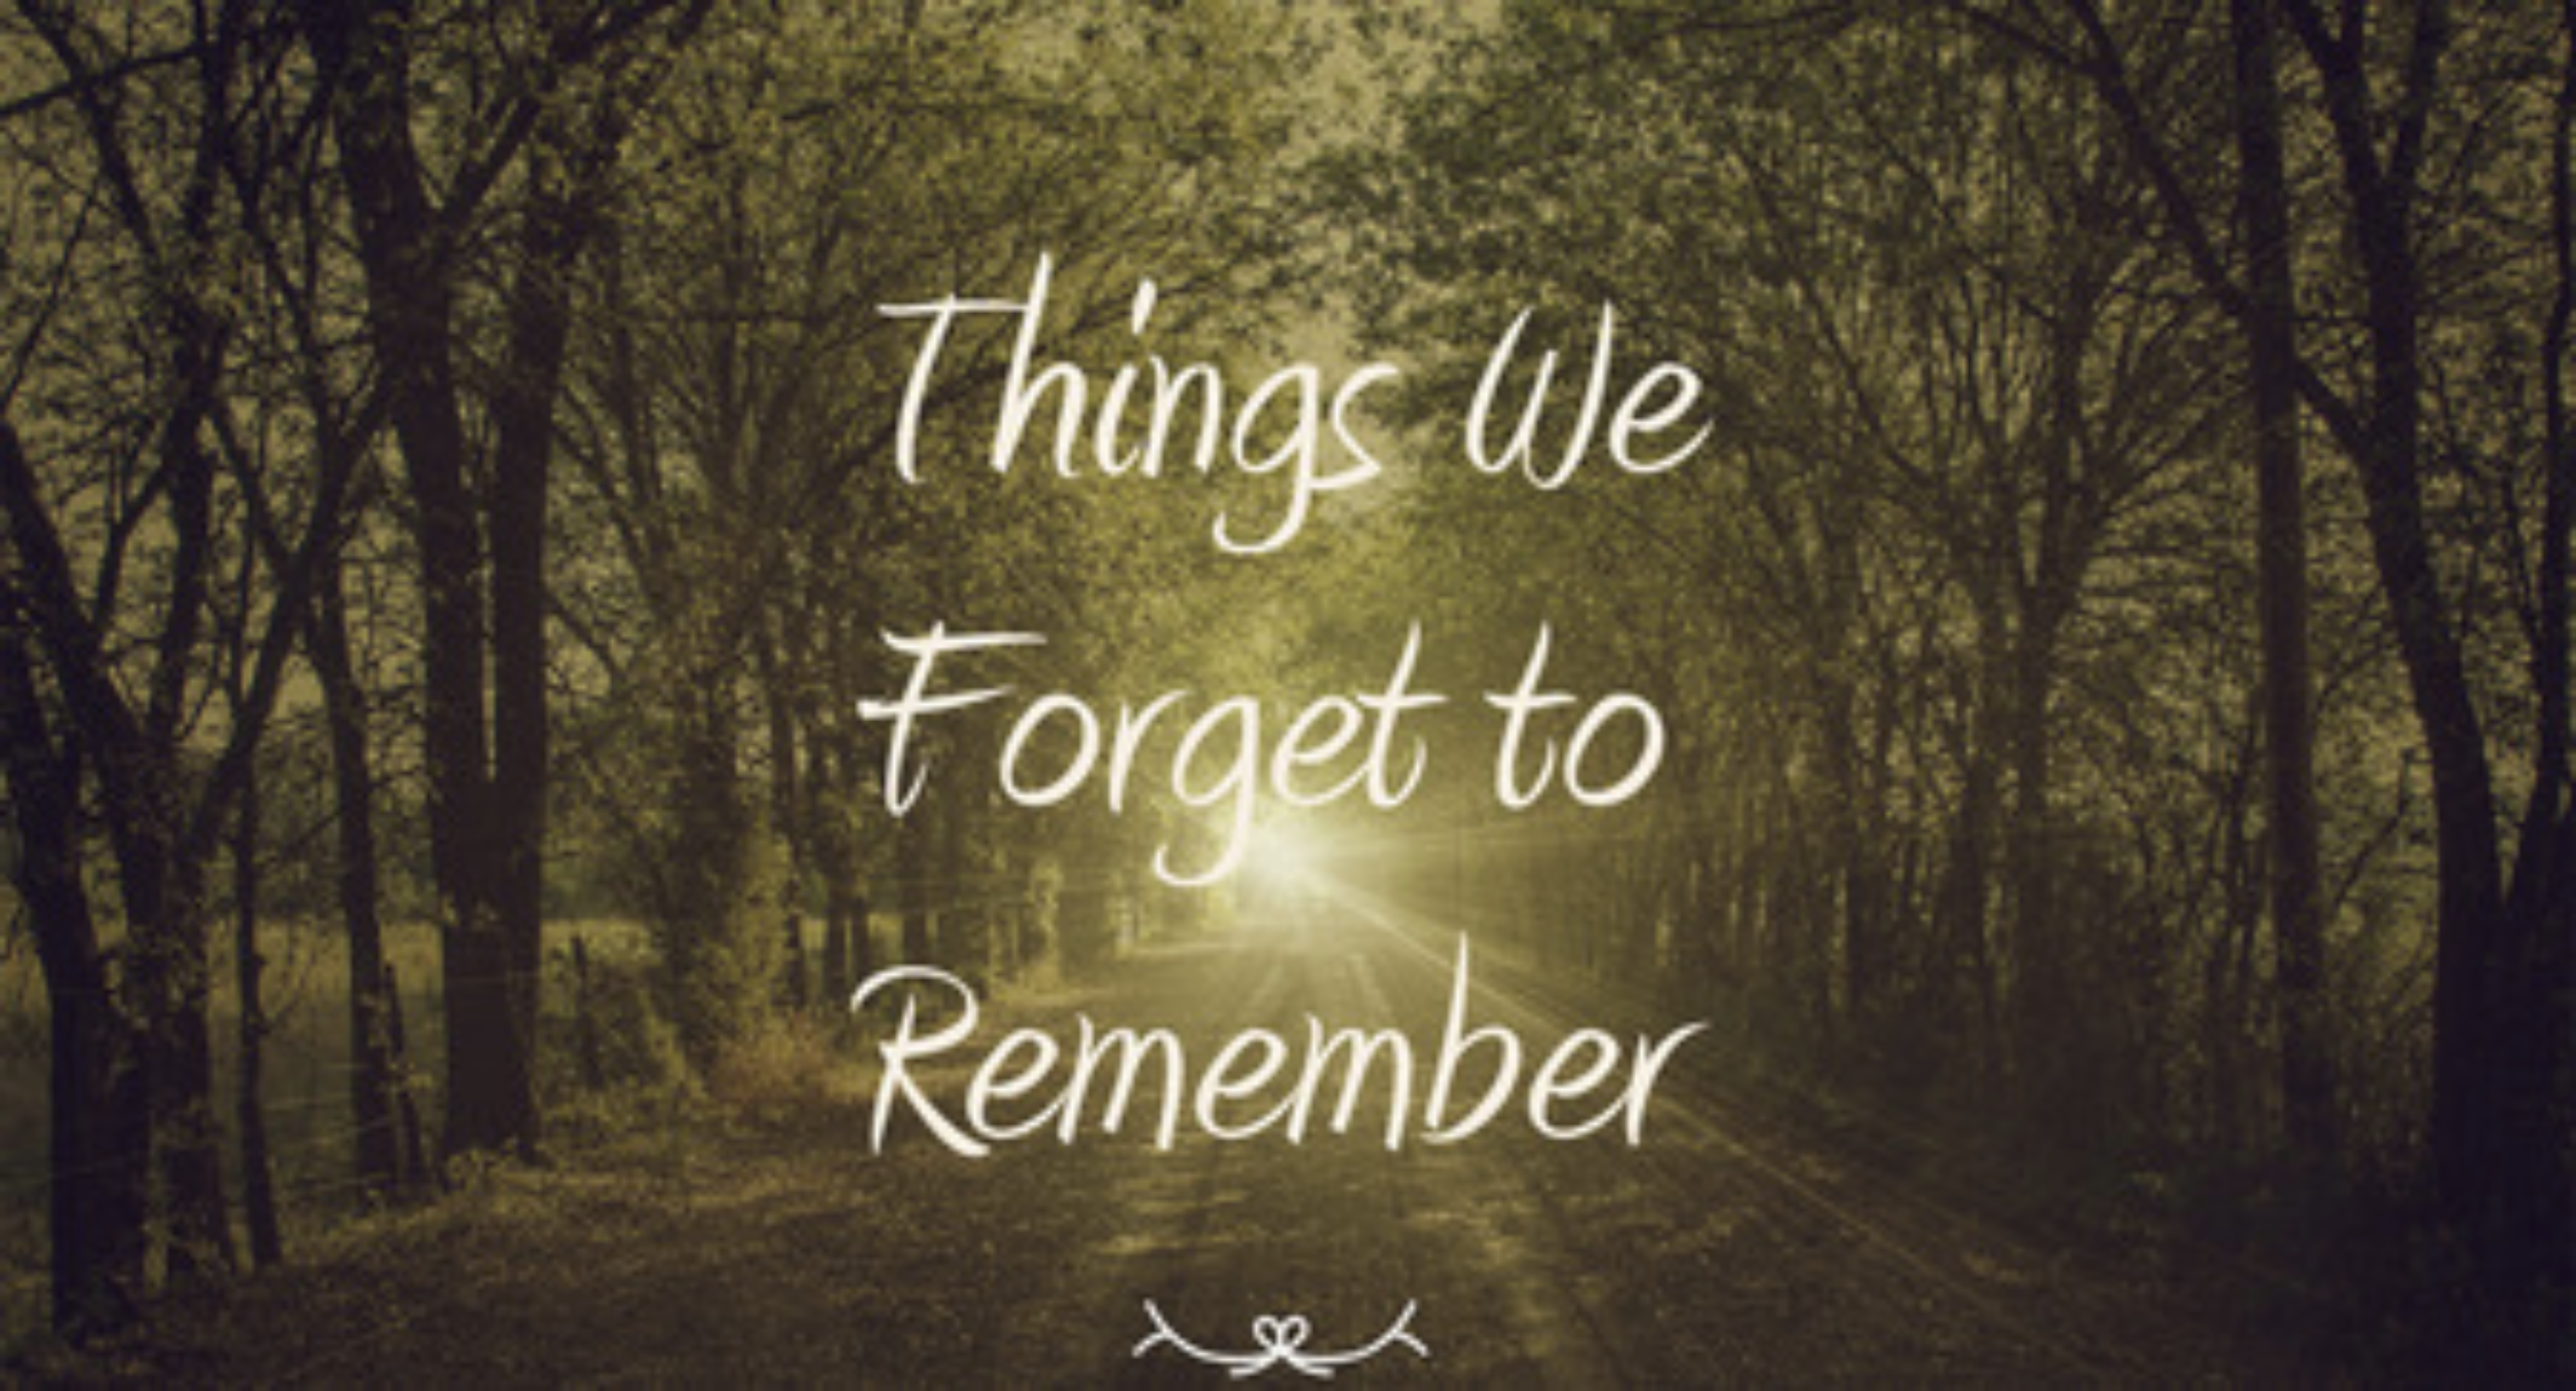 Things We Forget to Remember